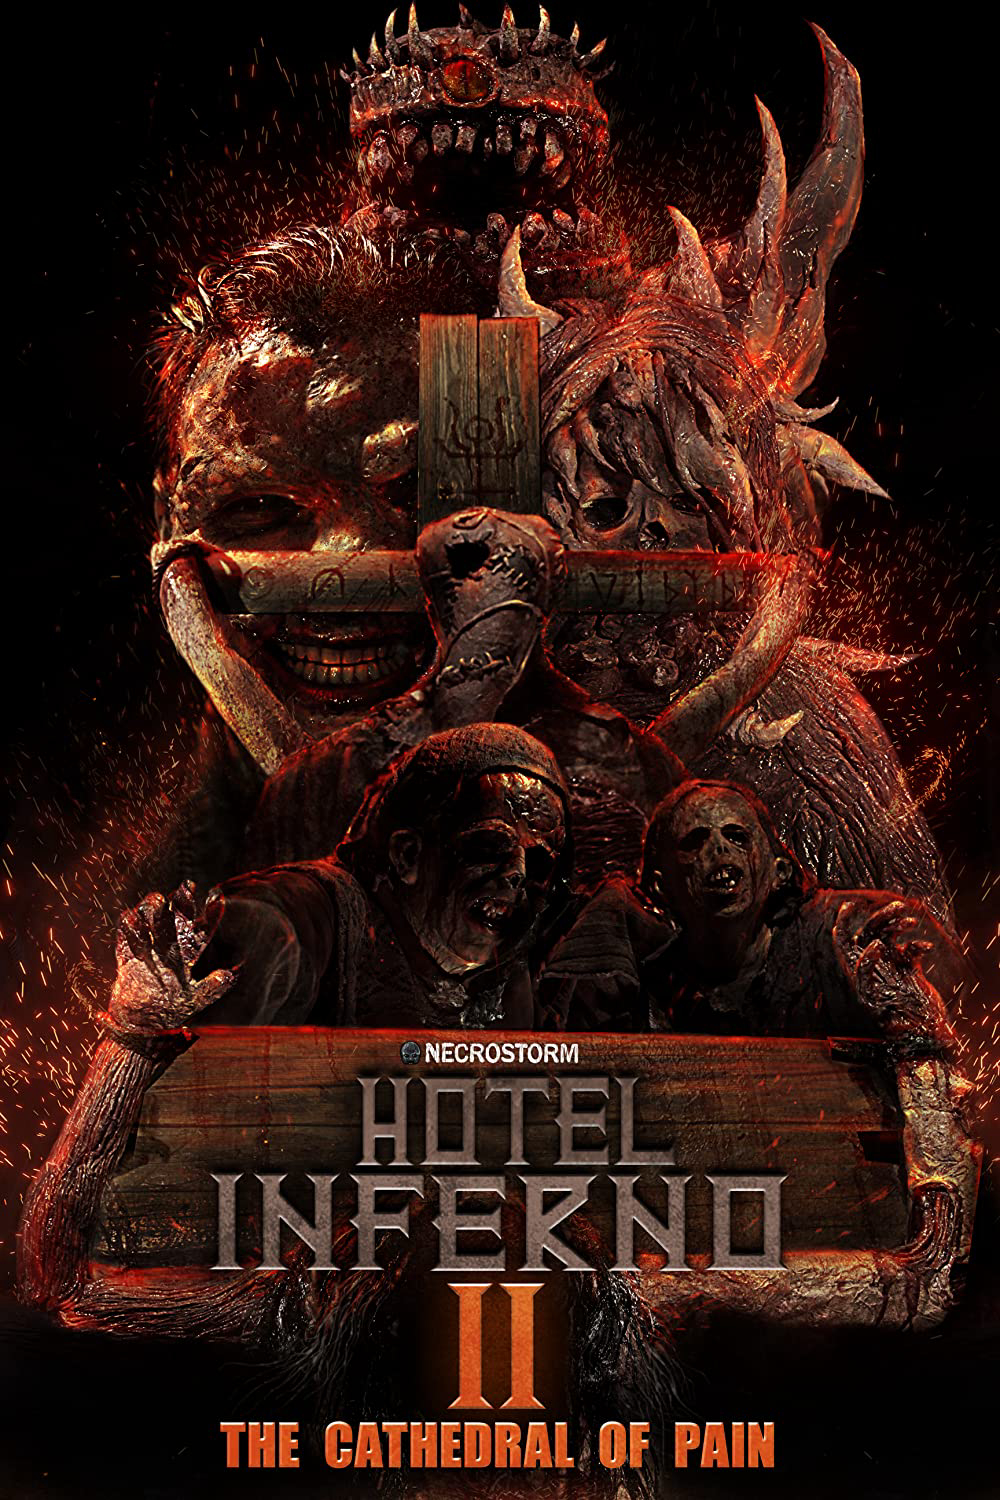 Xem Phim Hotel Inferno 2: The Cathedral of Pain (Hotel Inferno 2: The Cathedral of Pain)